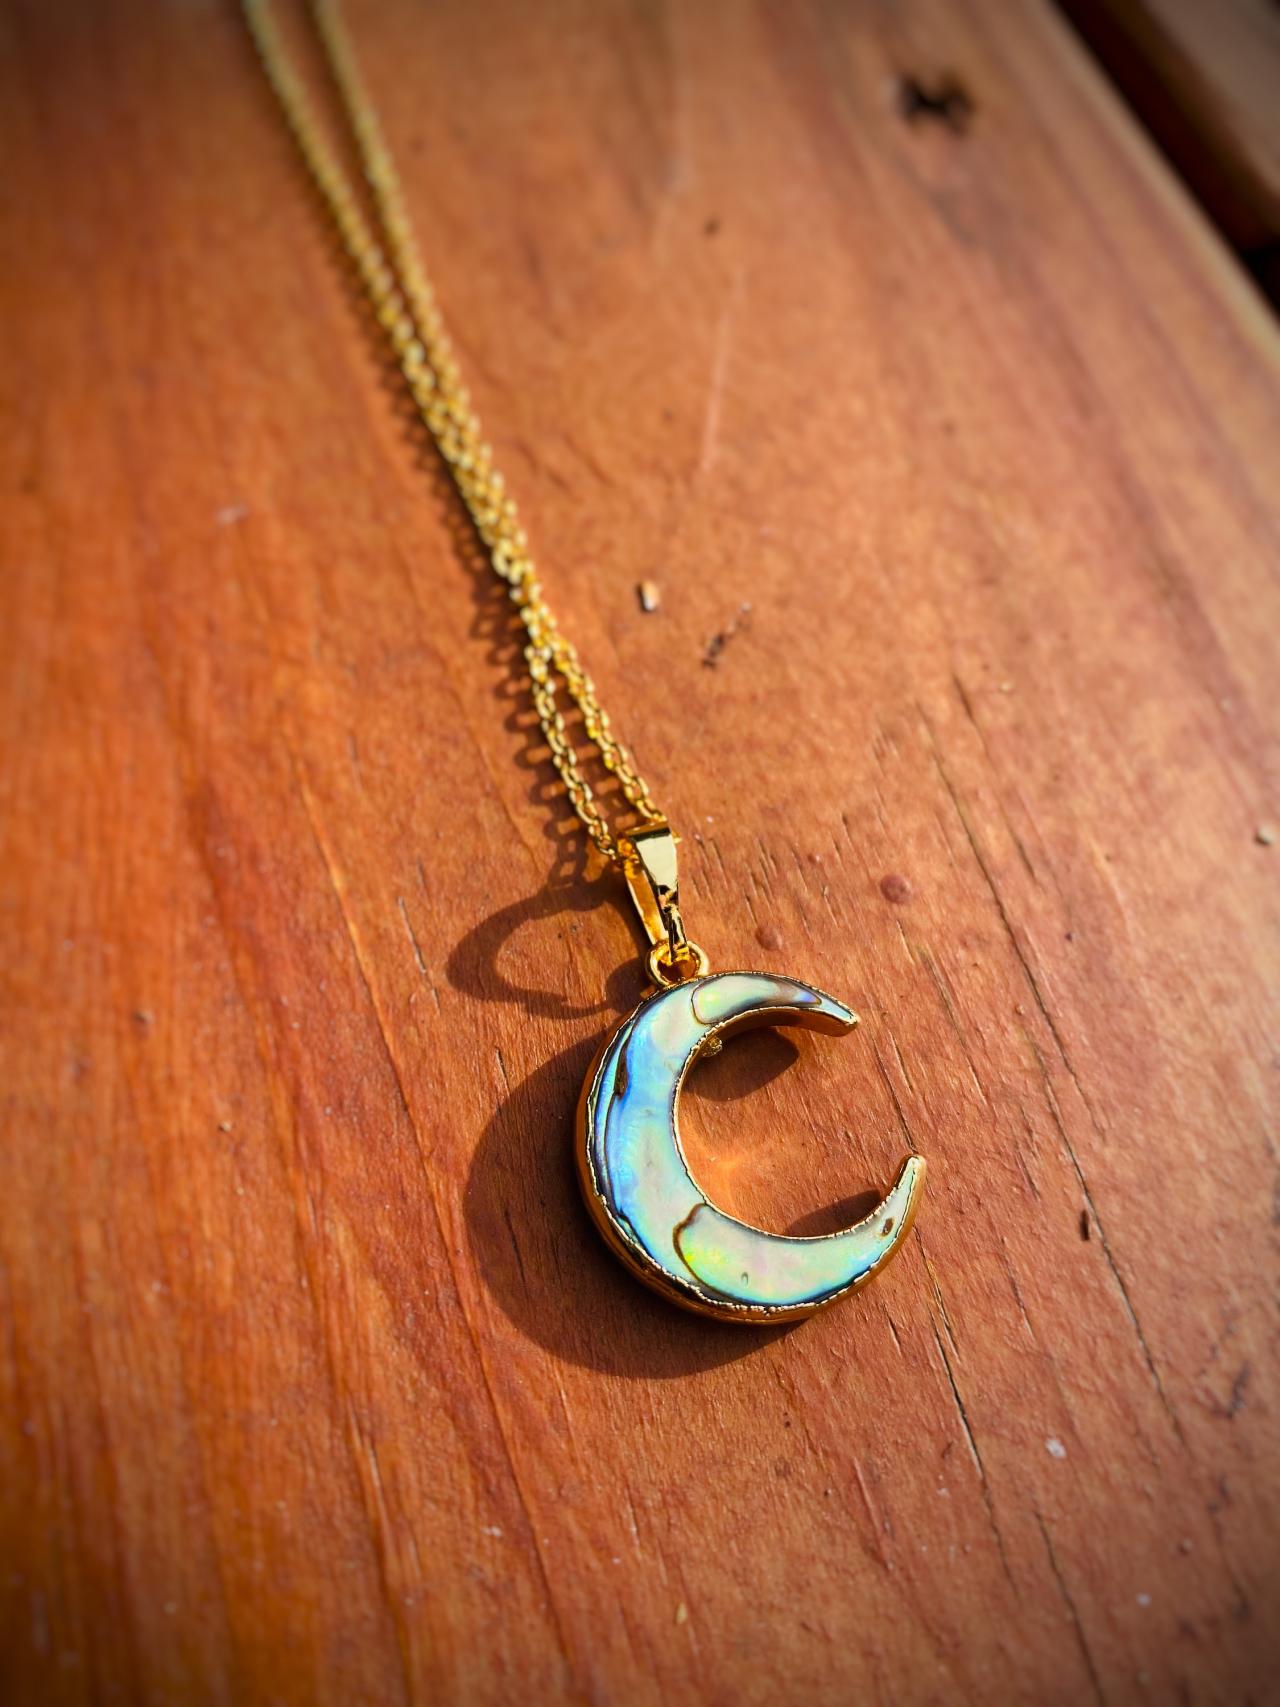 Natural Abalone Shell Crescent Moon Necklace - Moon necklace - Moon jewelry - shell jewelry - Crescent Moon Pendant - Moon pendant